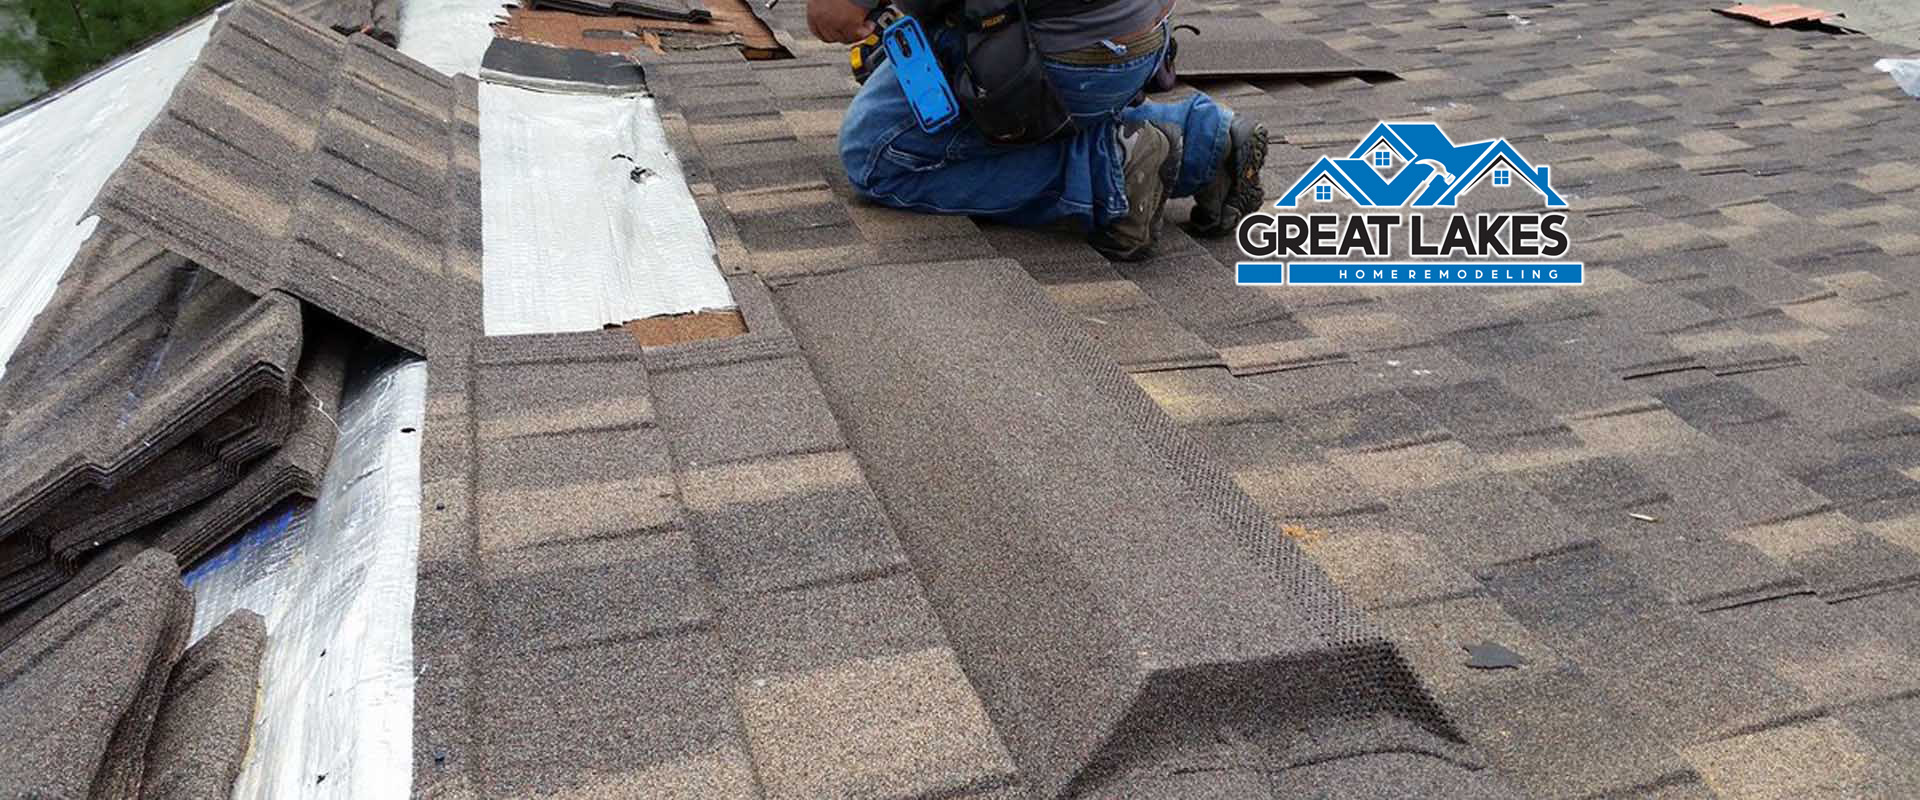 Professional Roofing Solution in Ohio and Michigan